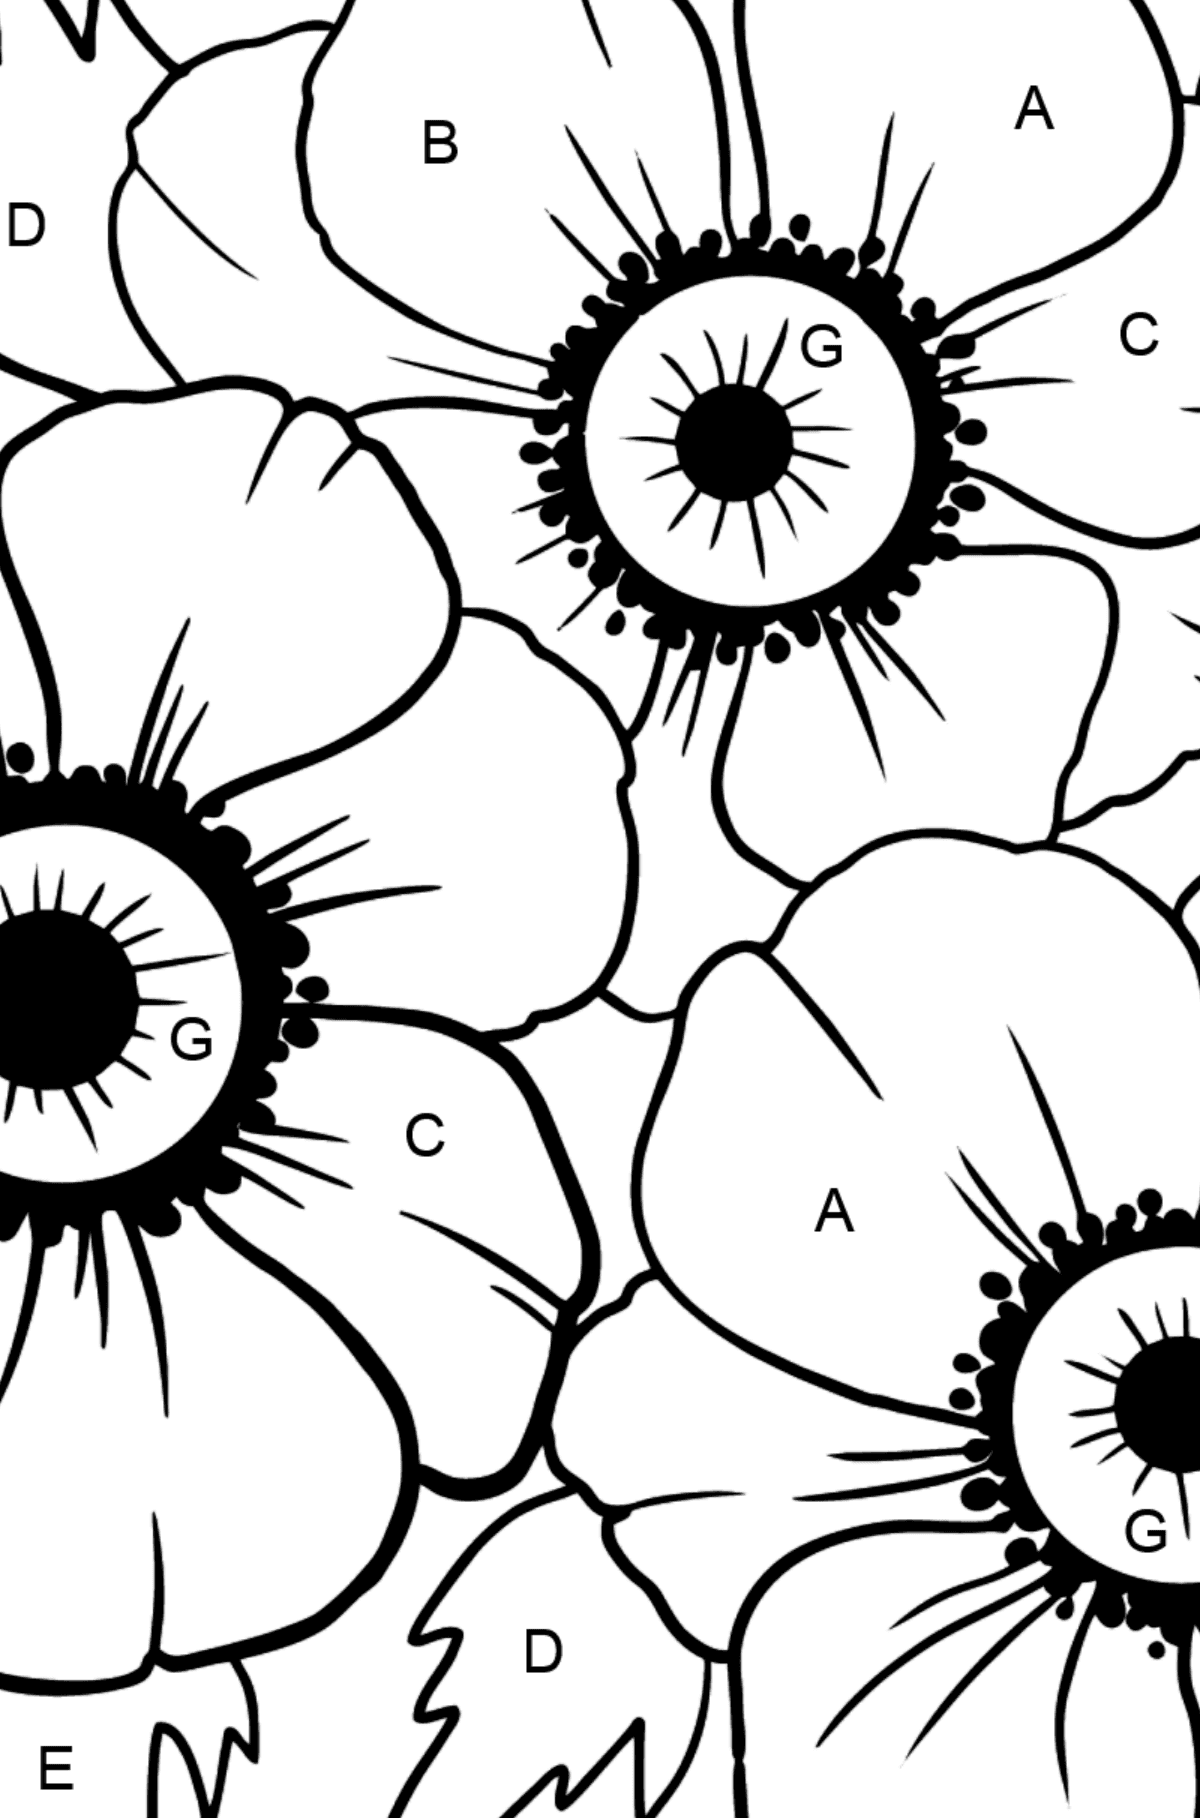 Flower Coloring Page - A Yellow and Orange Anemone Coronaria - Coloring by Letters for Kids